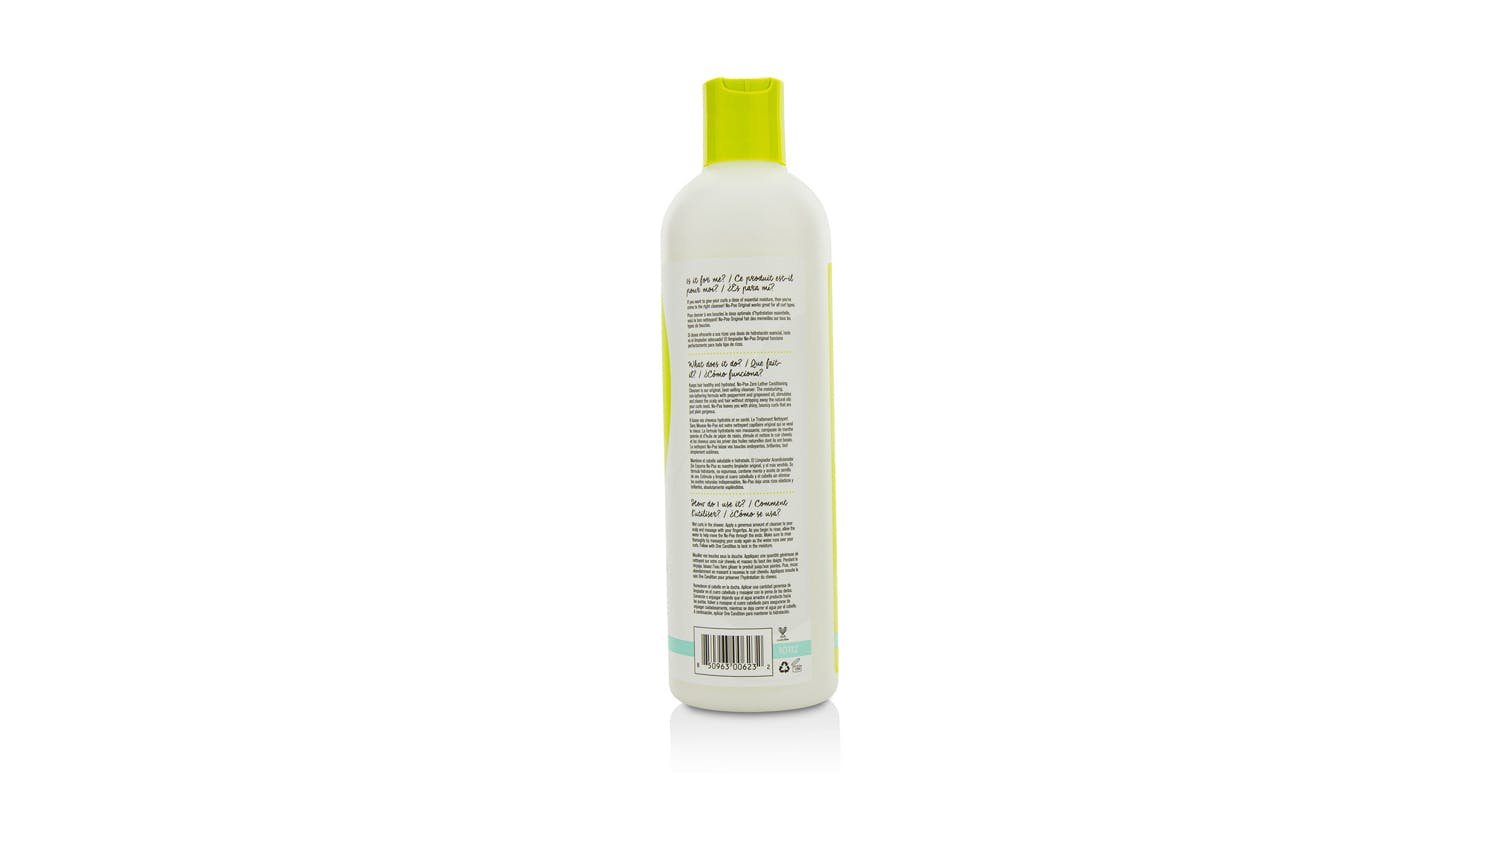 DevaCurl No-Poo Original (Zero Lather Conditioning Cleanser - For Curly Hair) - 355ml/12oz